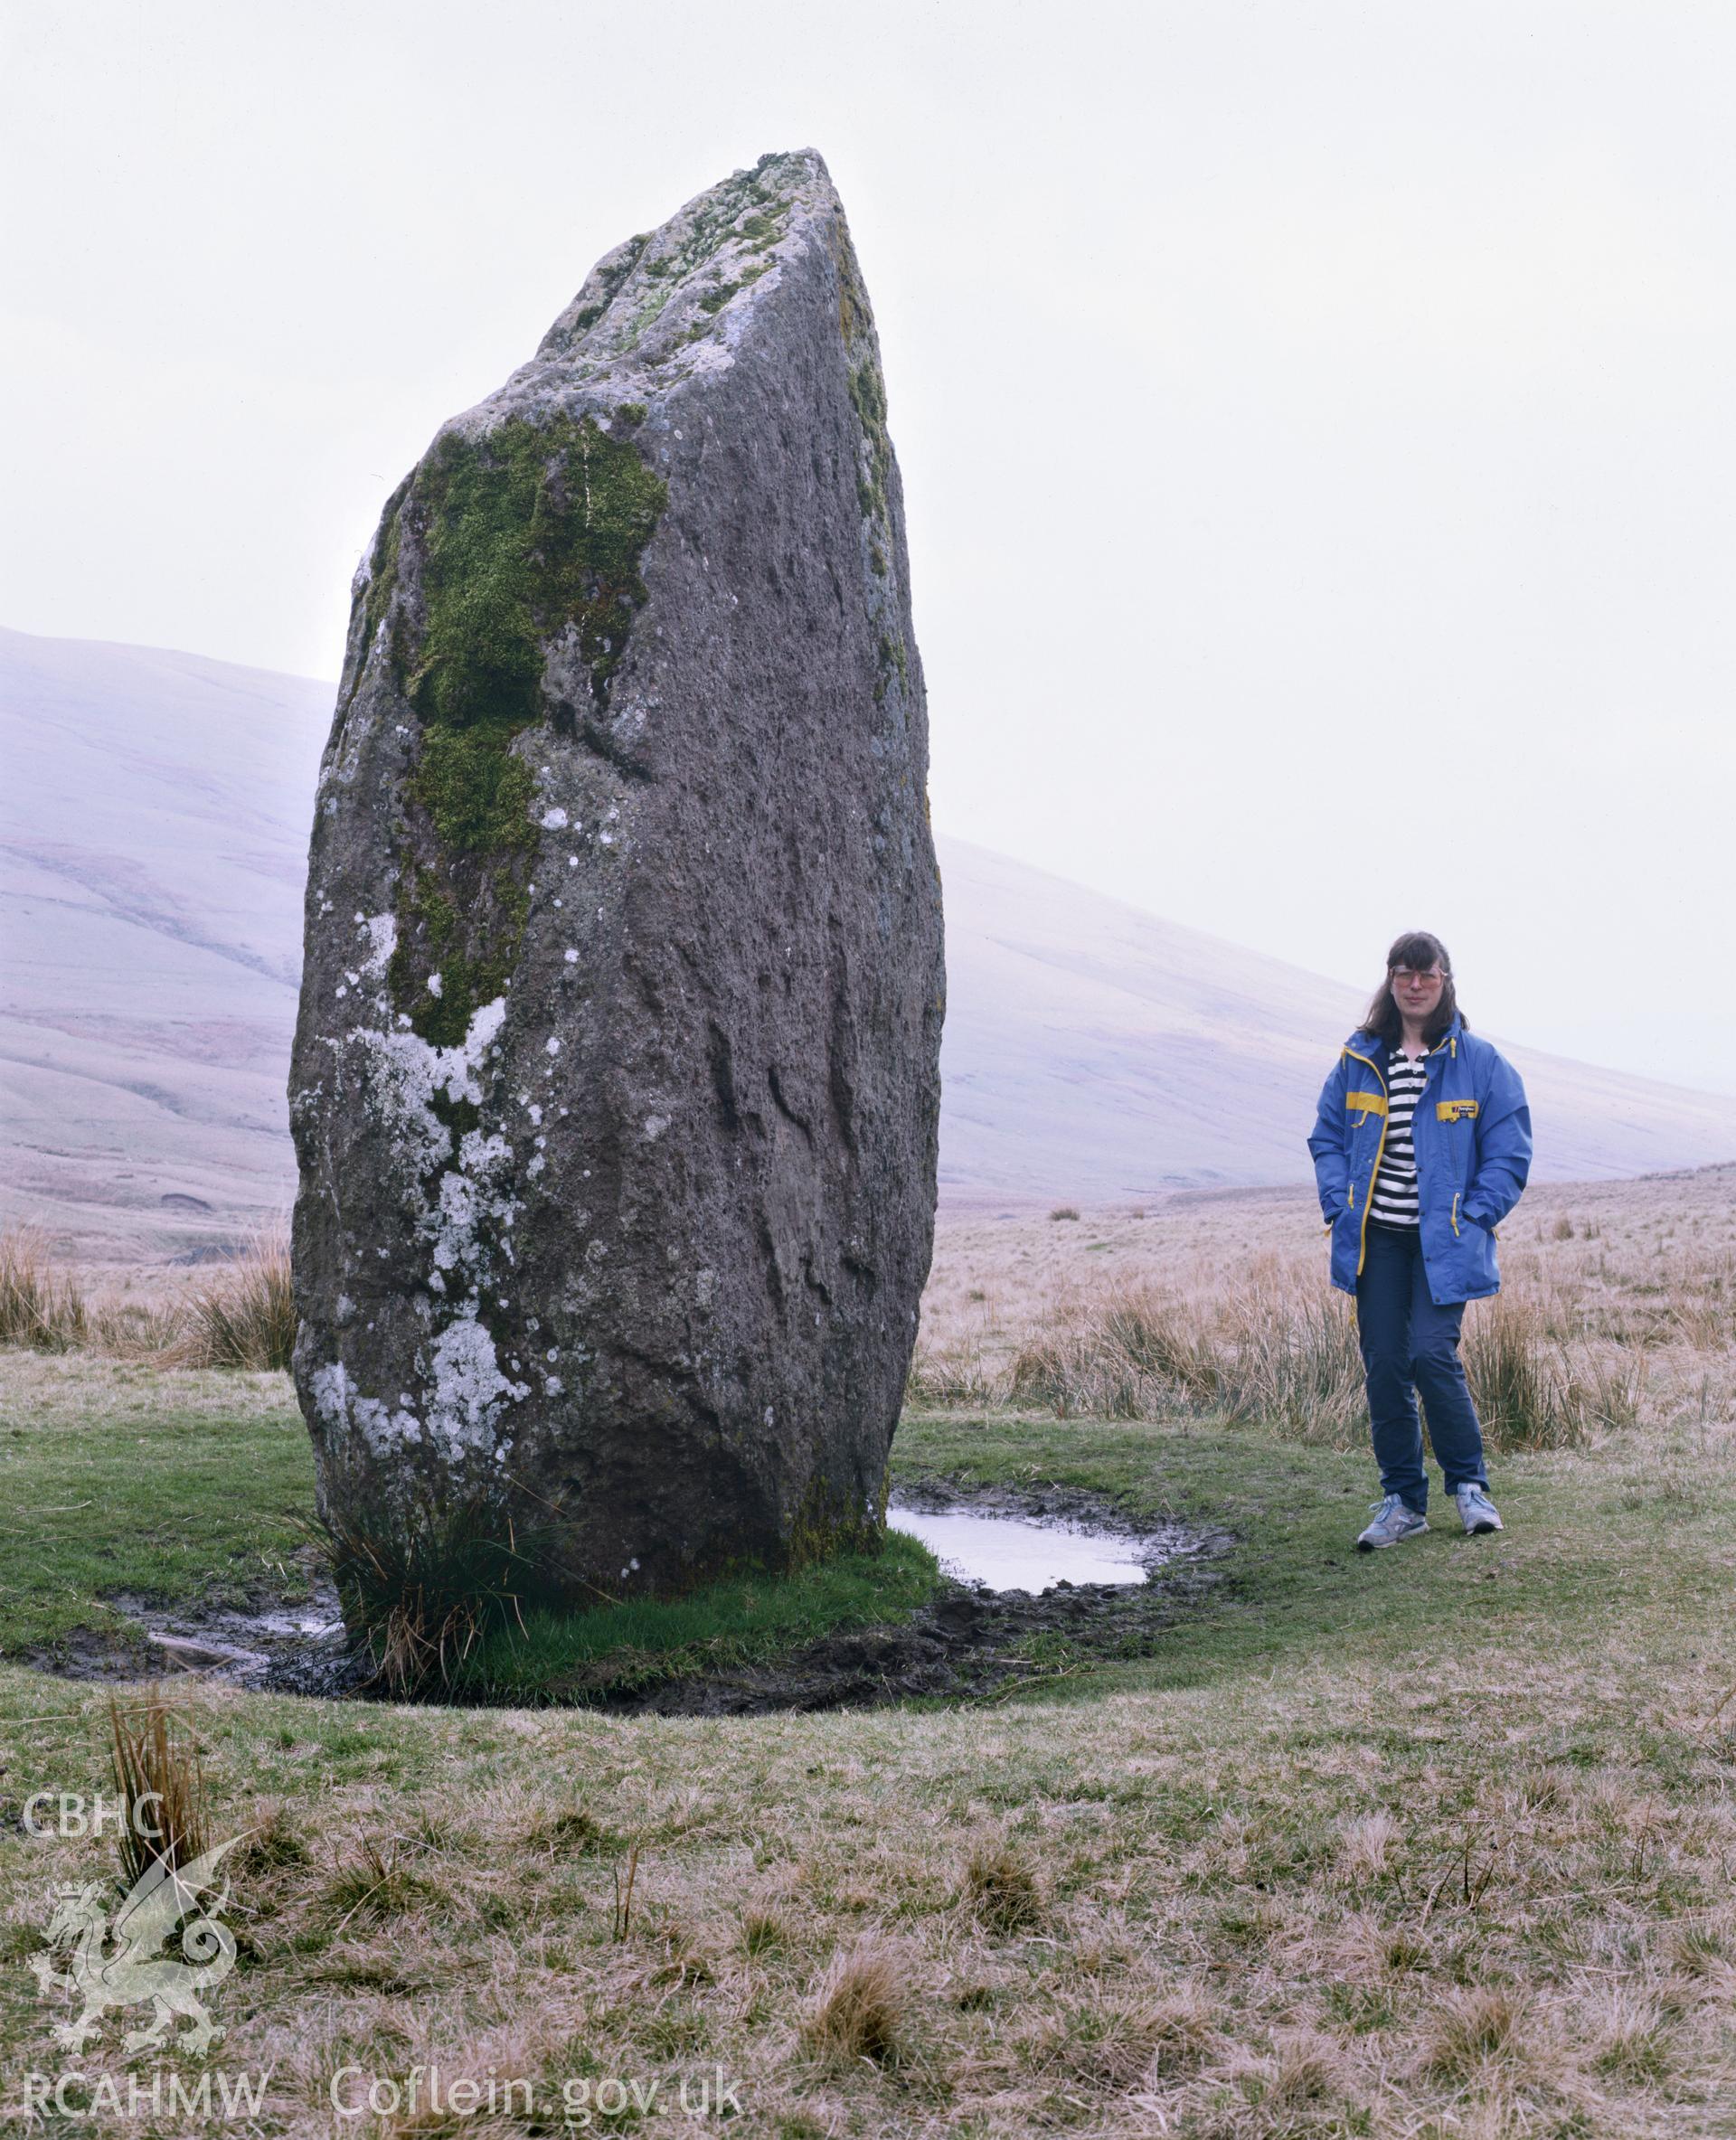 Colour transparency showing a view of Maen Llia Standing Stone Alignment, Maescar, produced by Iain Wright, c.1981.